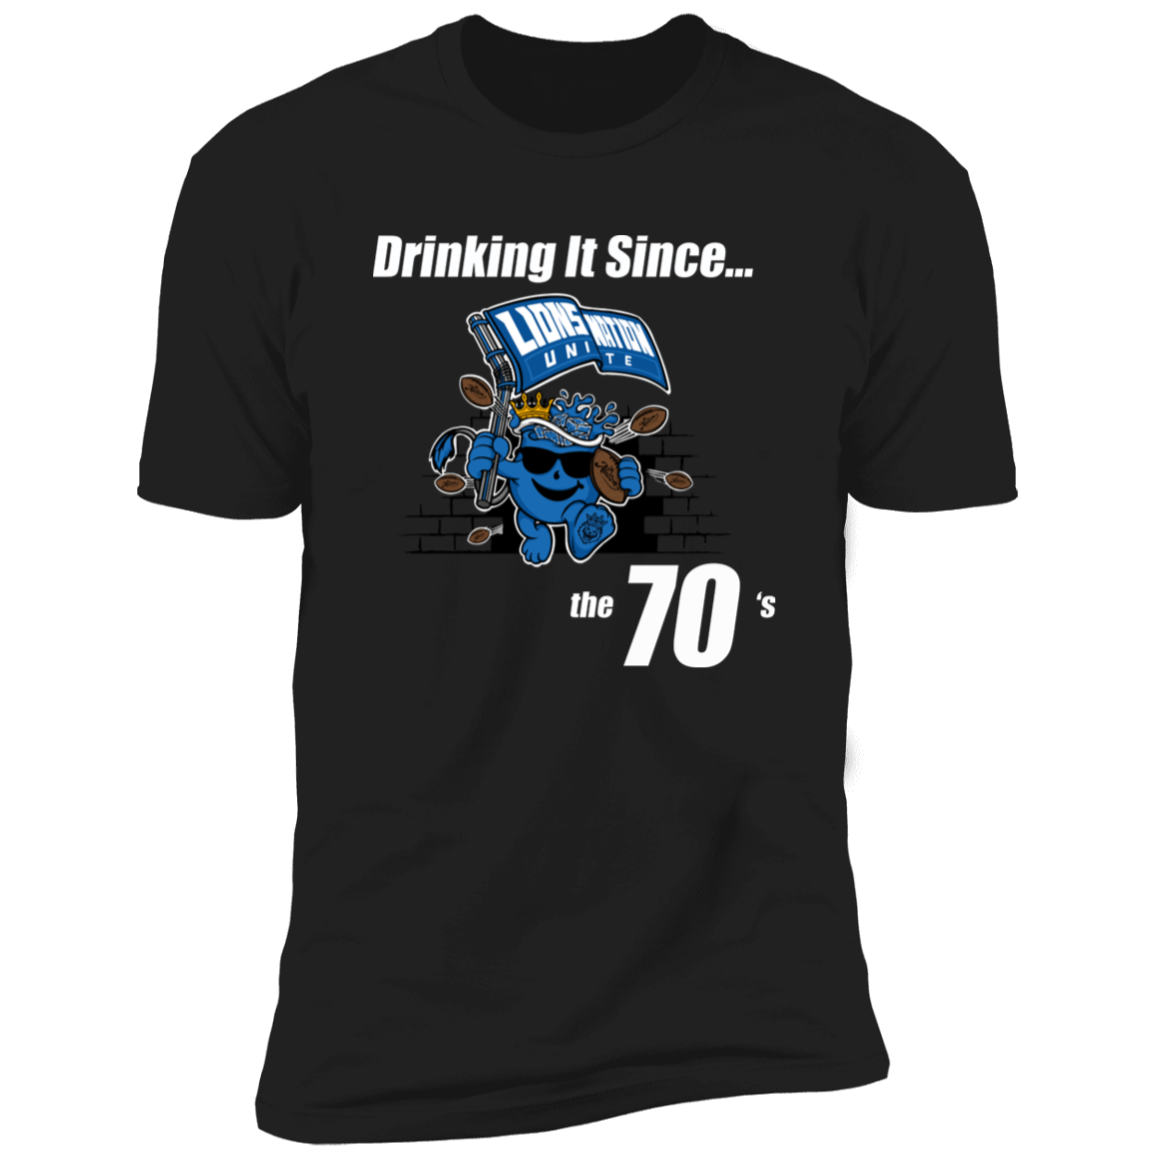 Drinking It Since the 70's Men's T-Shirt